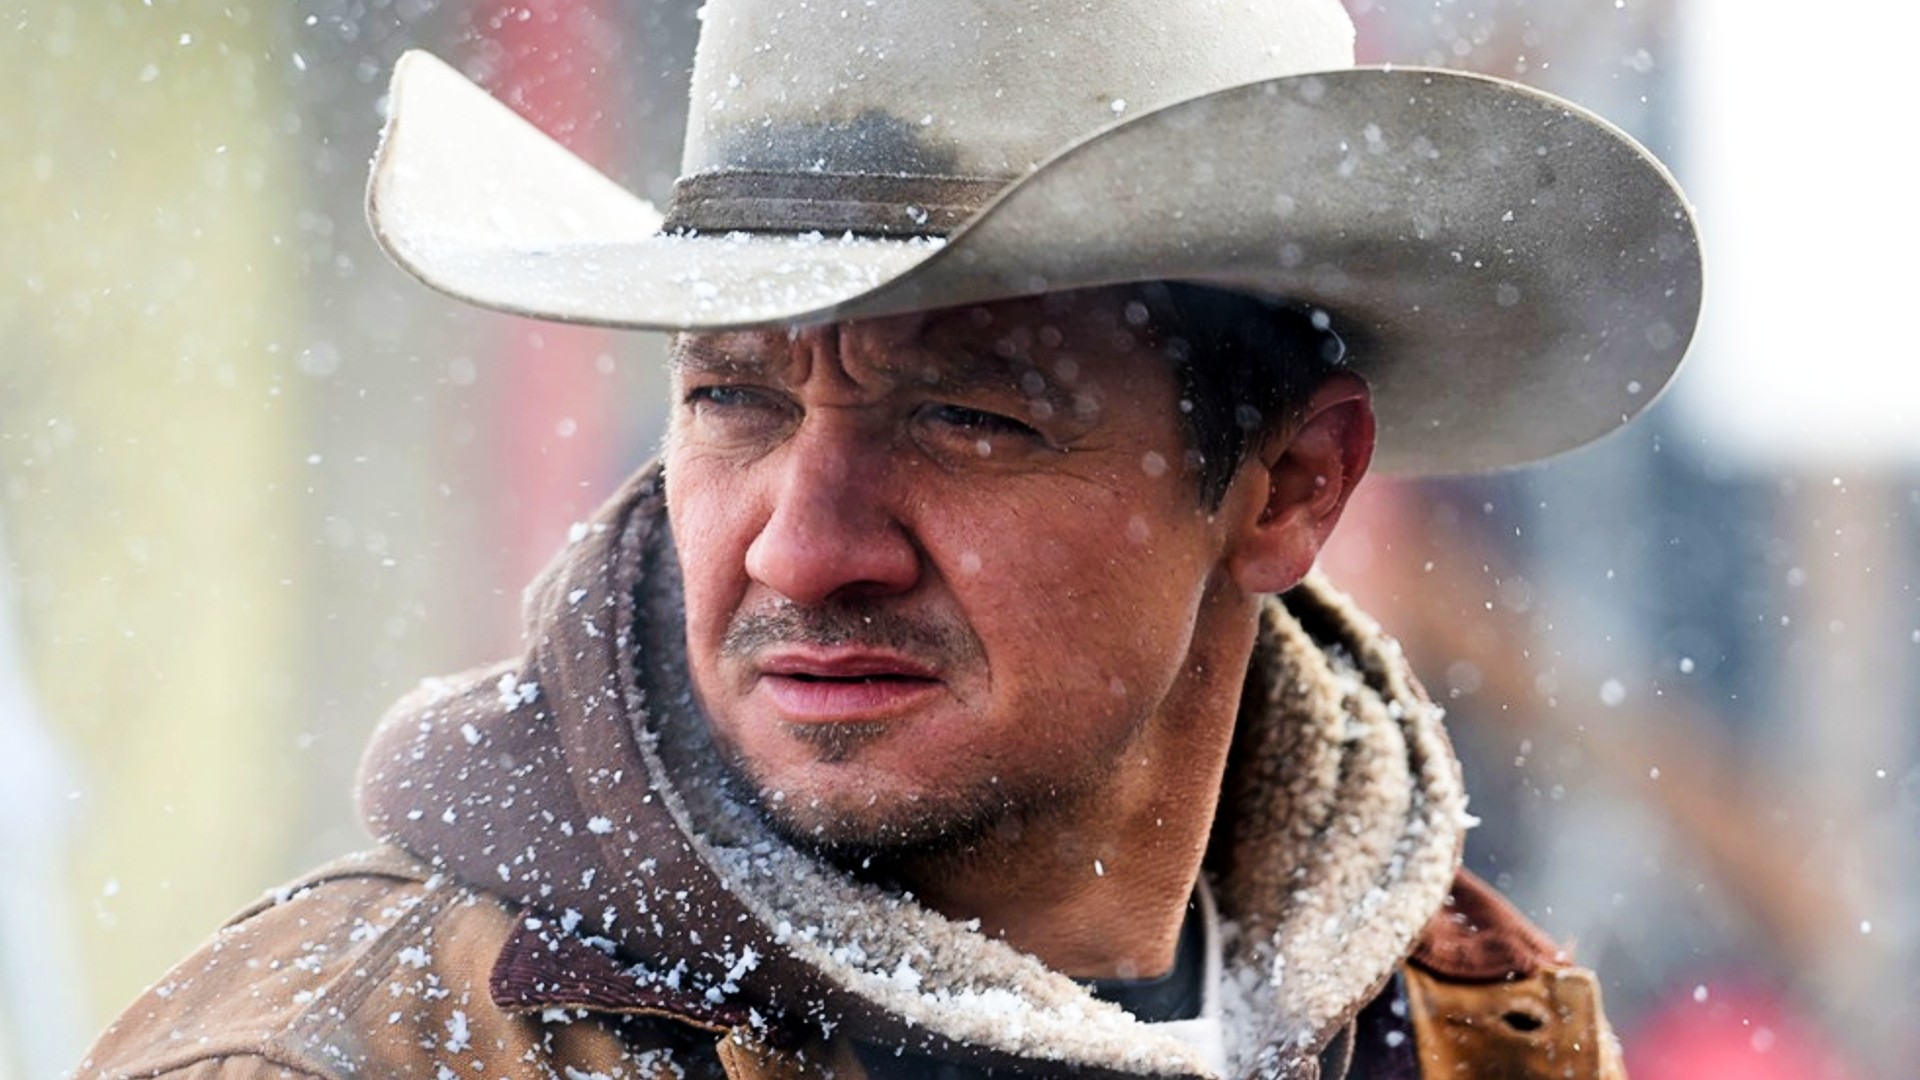 Jeremy Renner Reveals His Worst Fear After Snowplow Accident